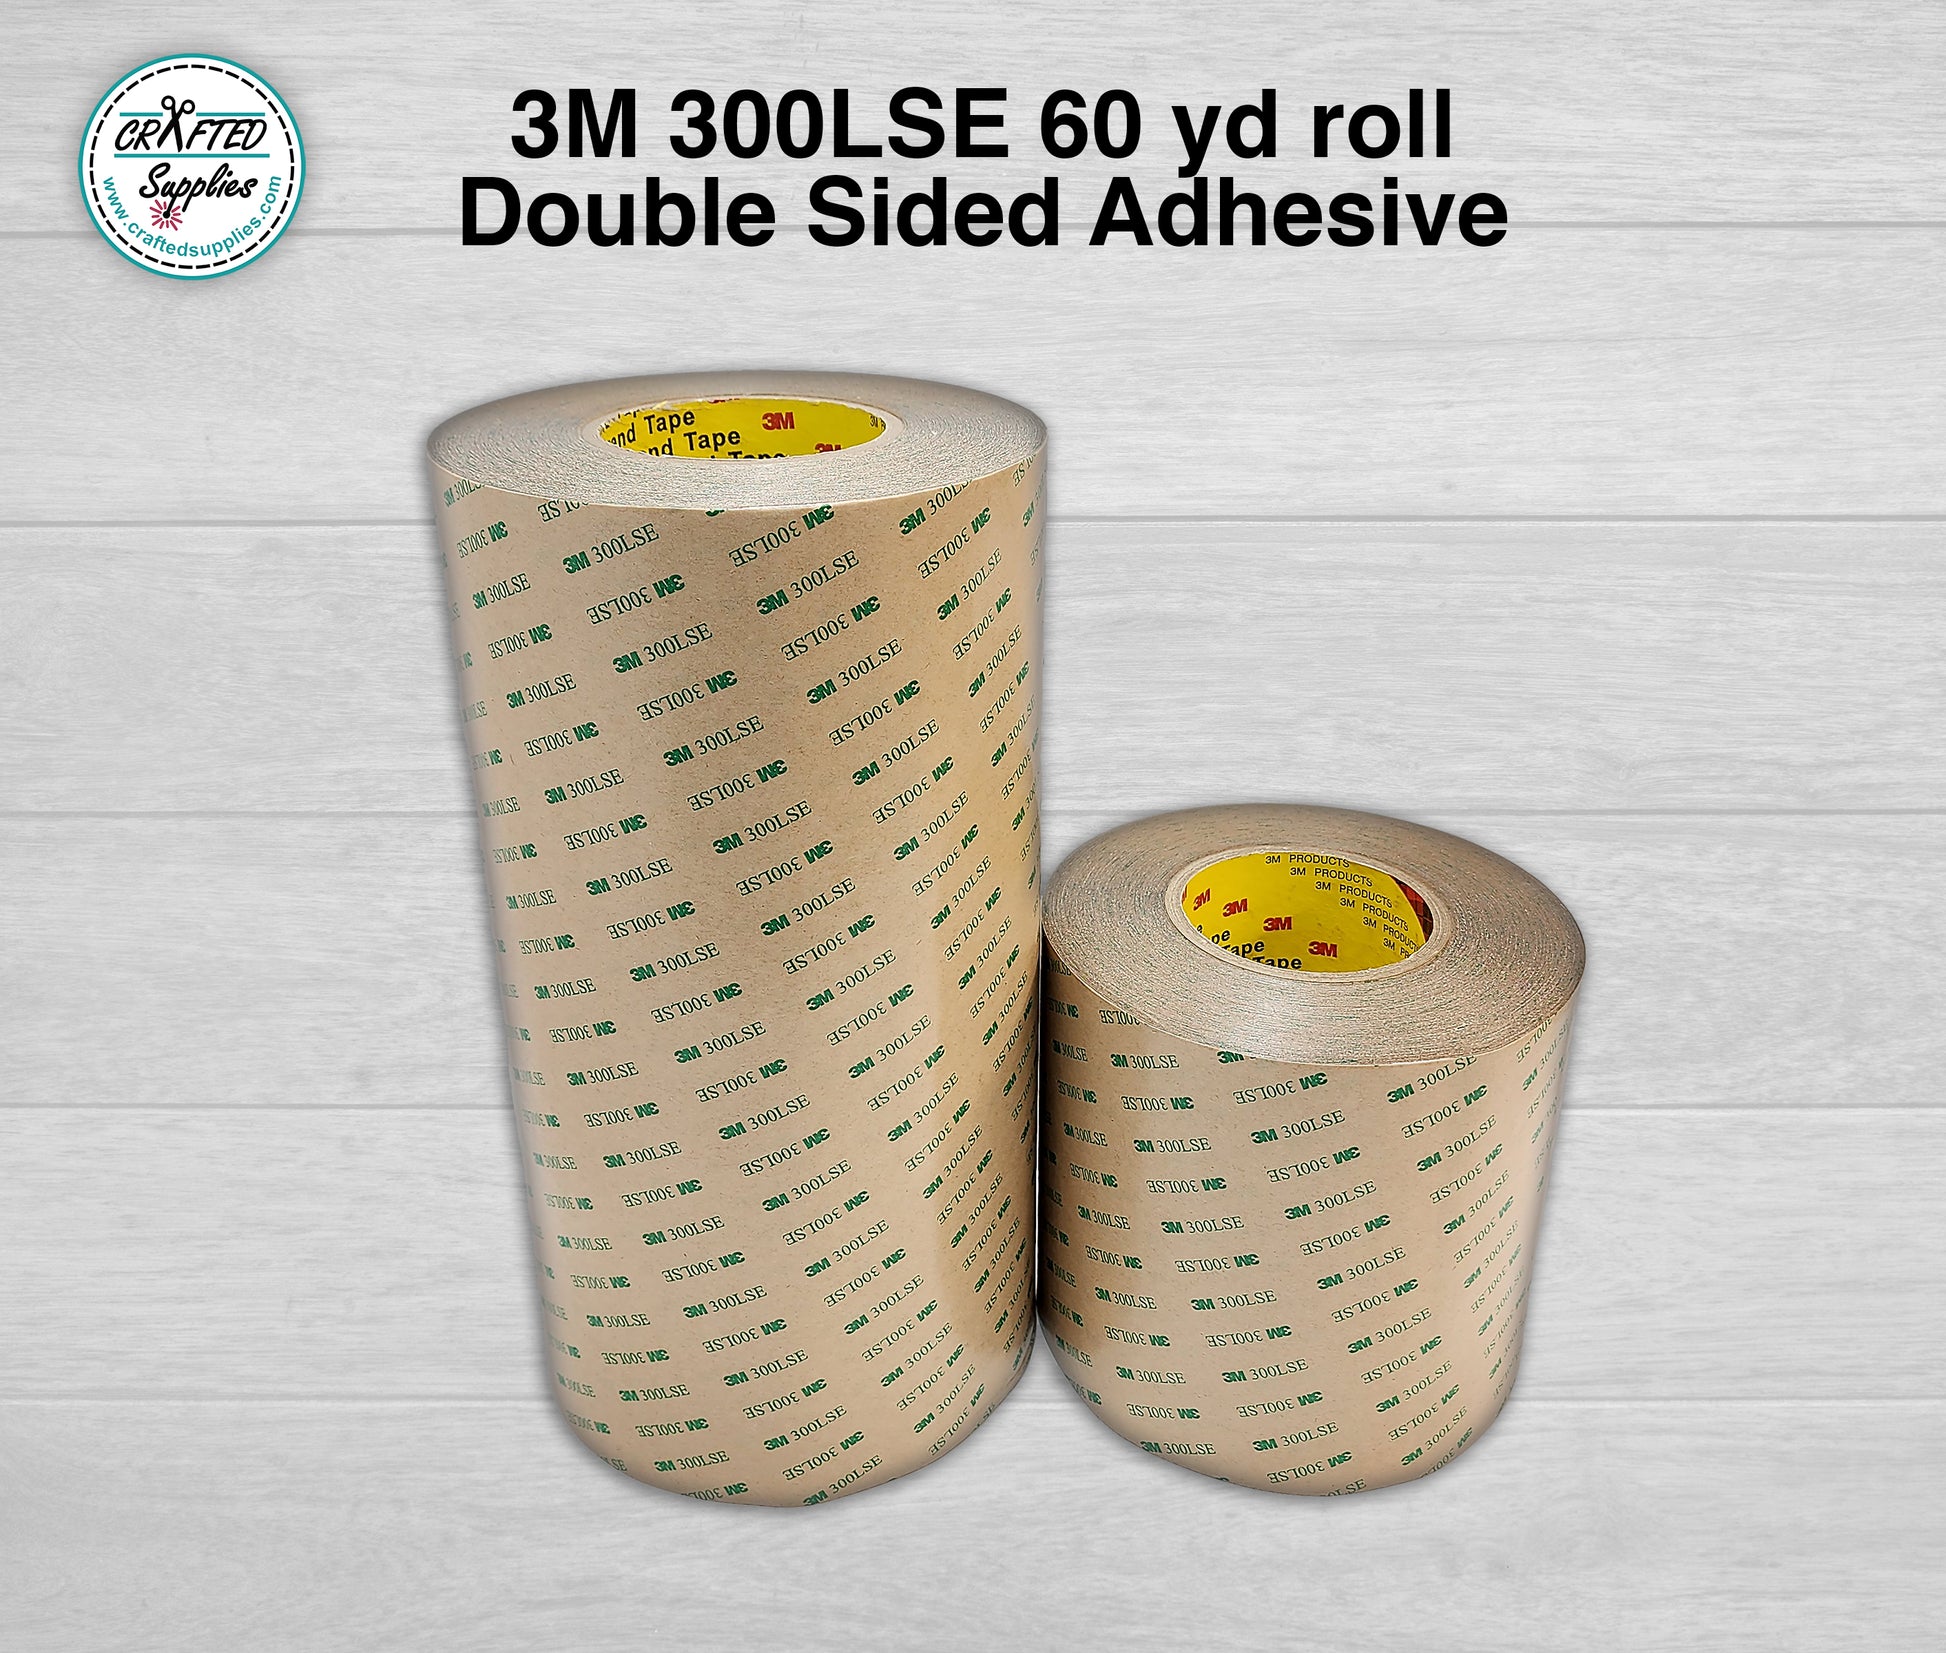 3M 300LSE Double Sided Tape, 12 x 60yd roll – CraftedSupplies